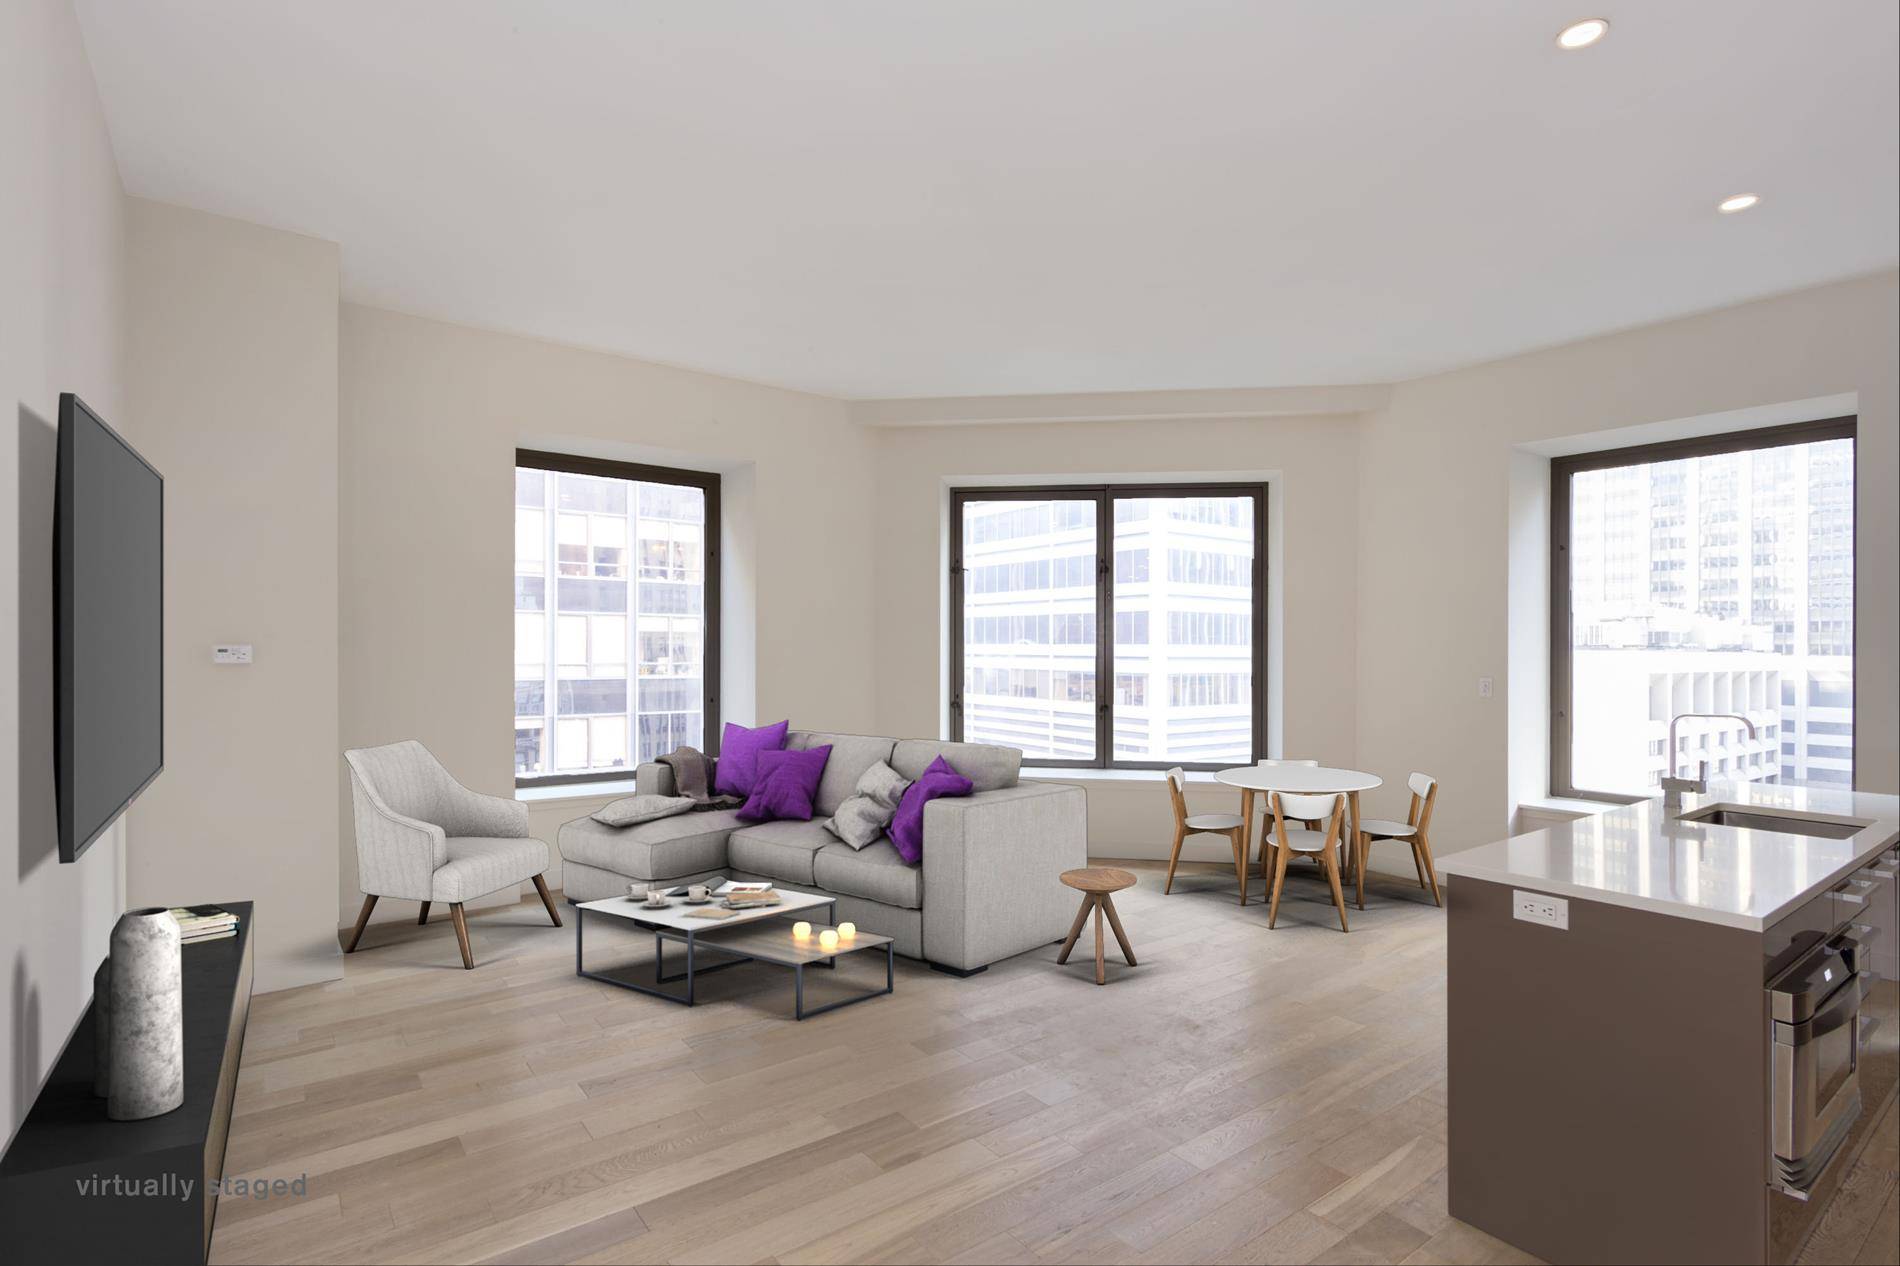 This is a very spacious 3 bedrooms, 2 baths residence in a luxury doorman building with a wrap around terrace with great views of the East River and the Hudson ...